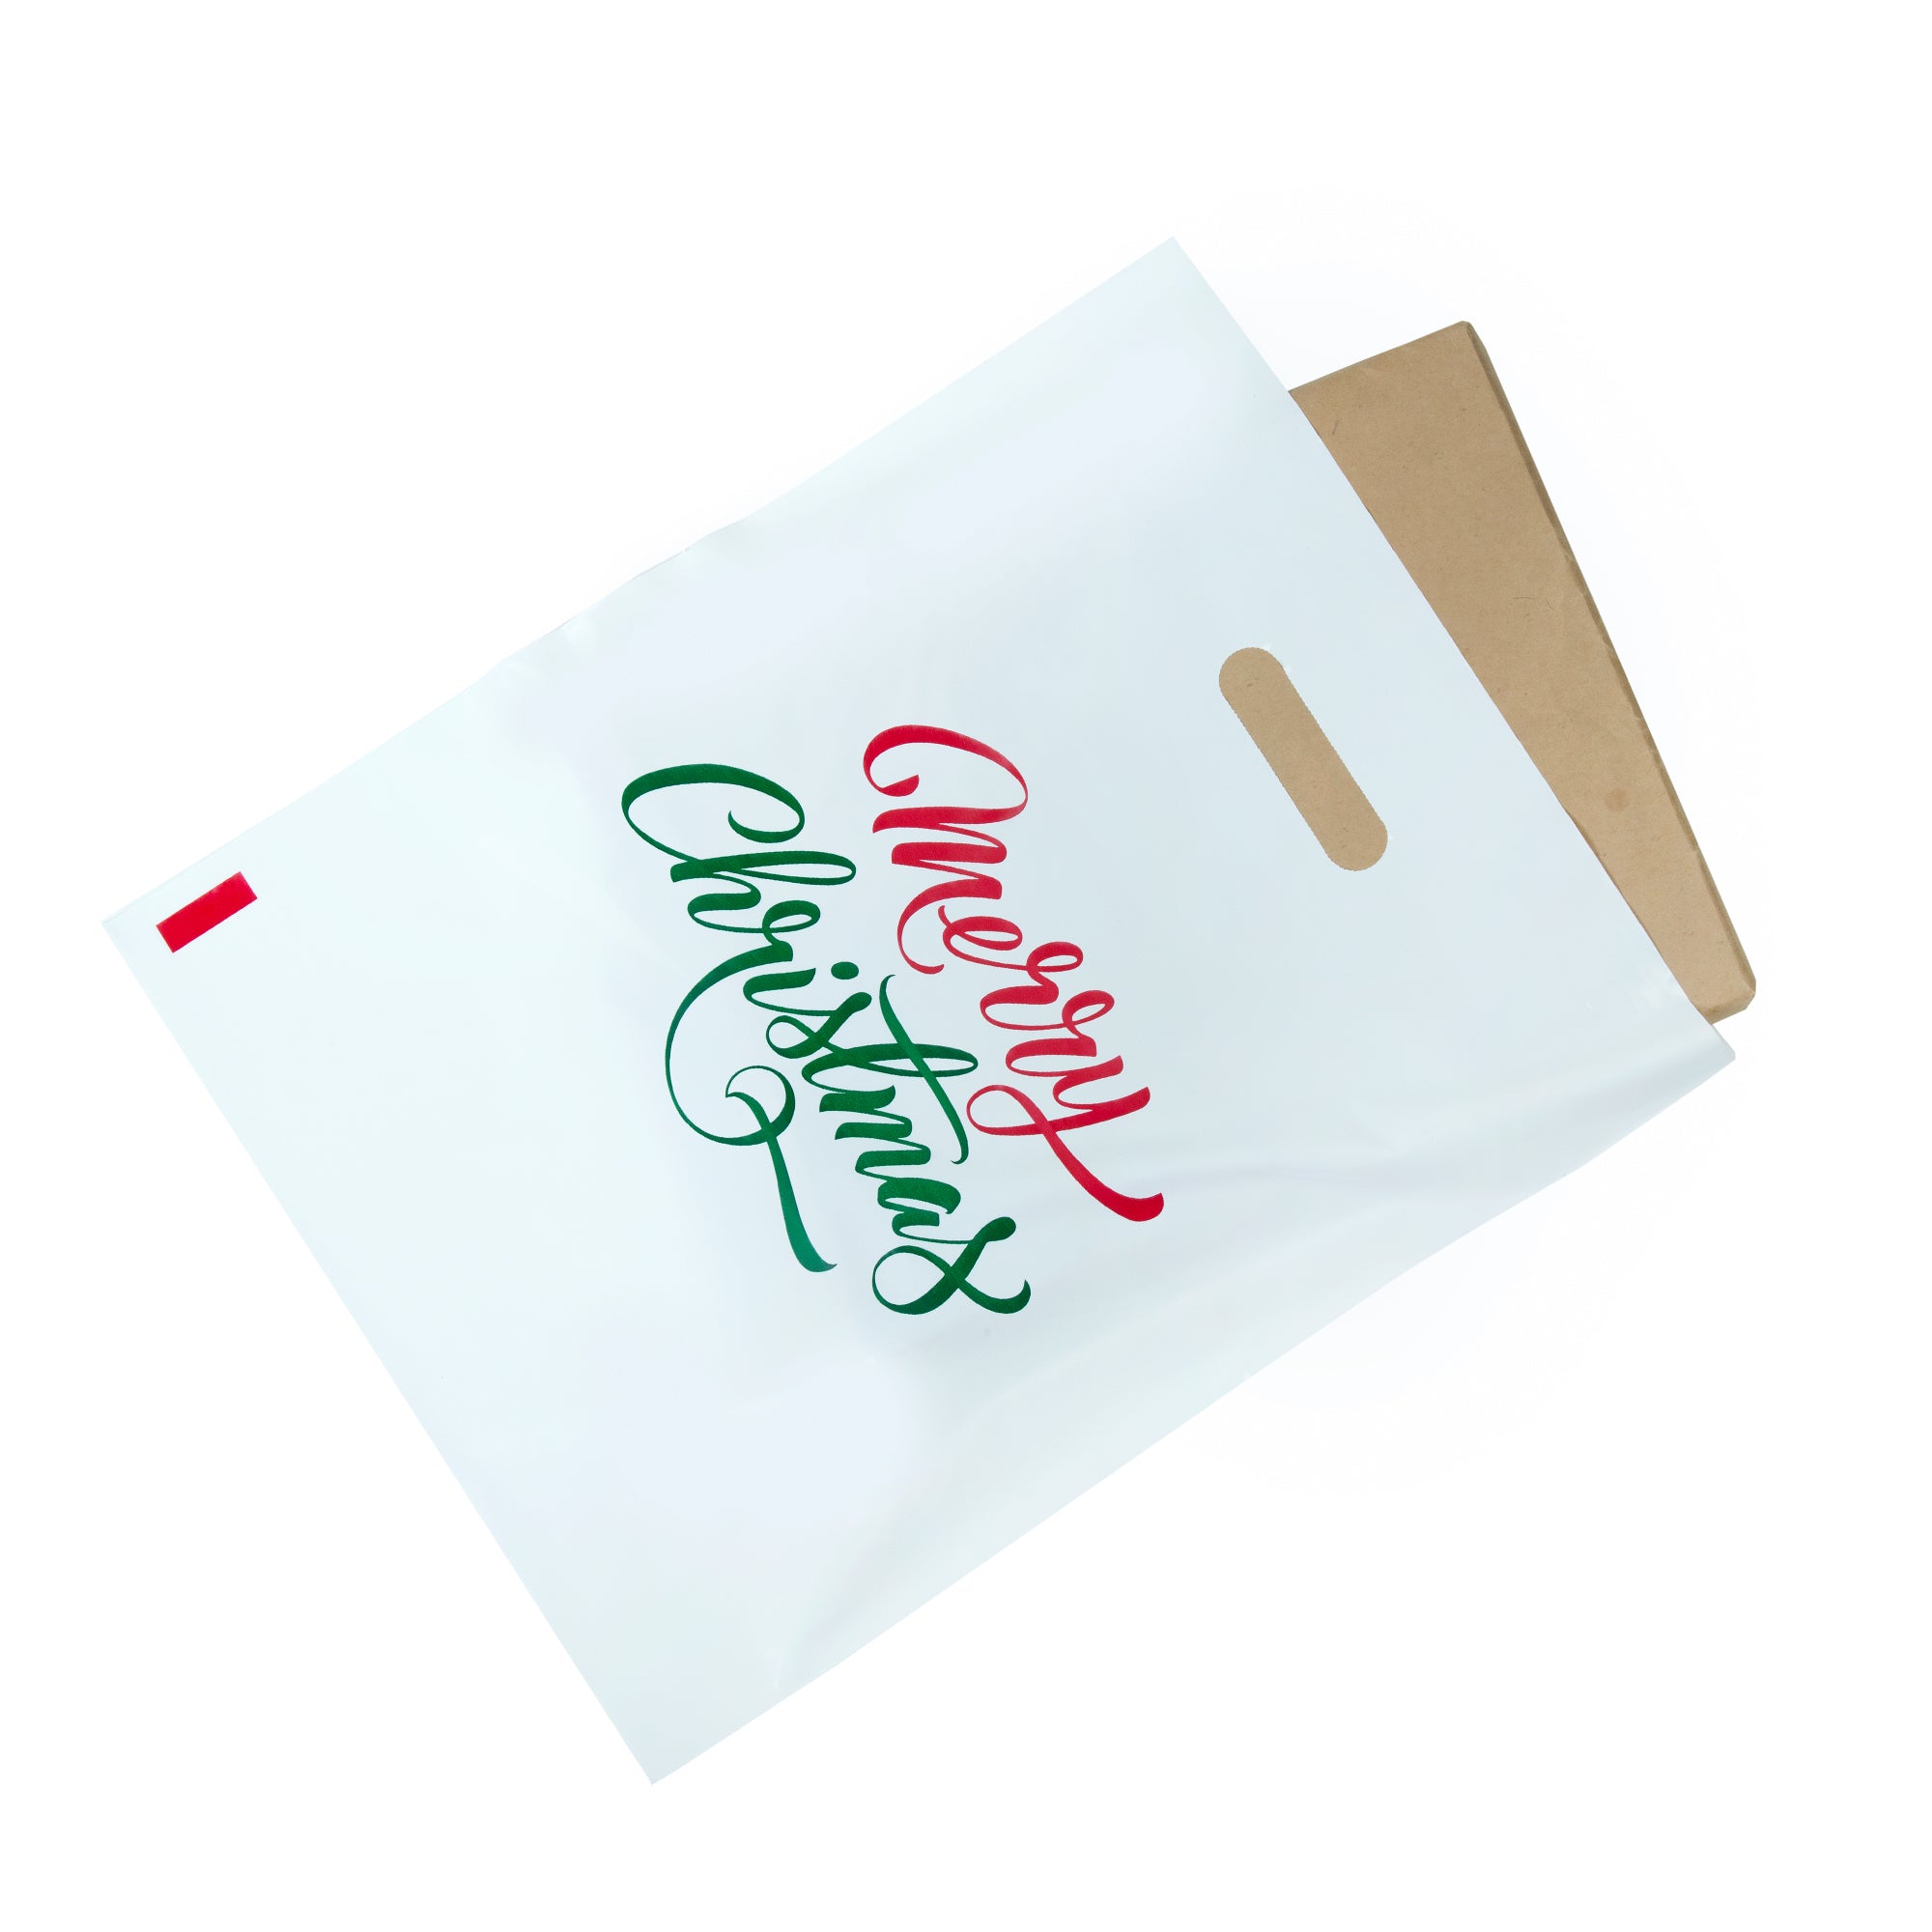 merry christmas printed bag with object inside